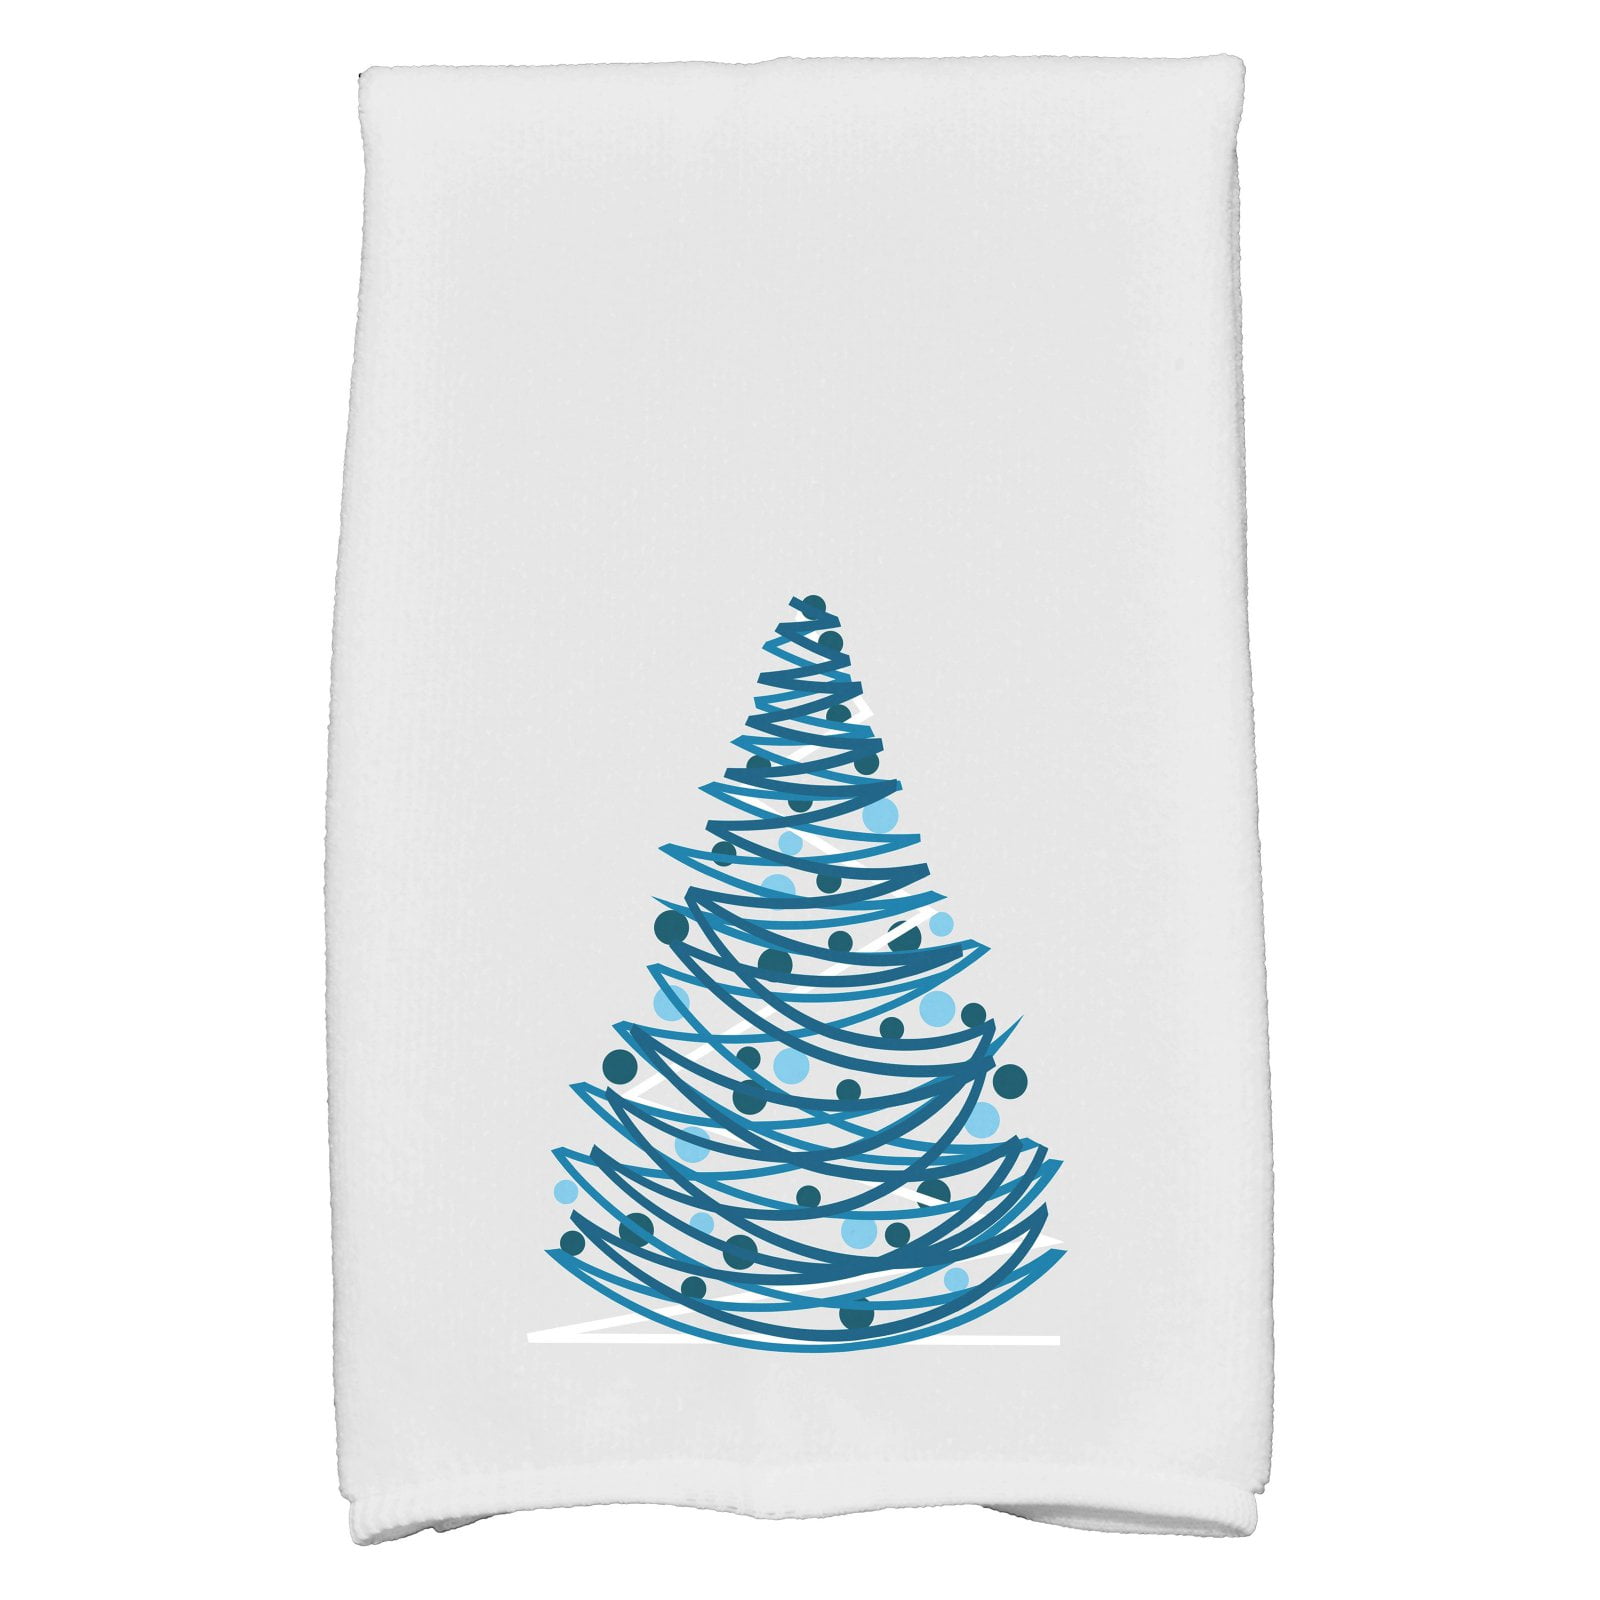 3D Rose Modern Pattern Triangle Xmas Holiday Tree Merry Christmas Greeting Snowflakes Background Hand/Sports Towel 15 x 22